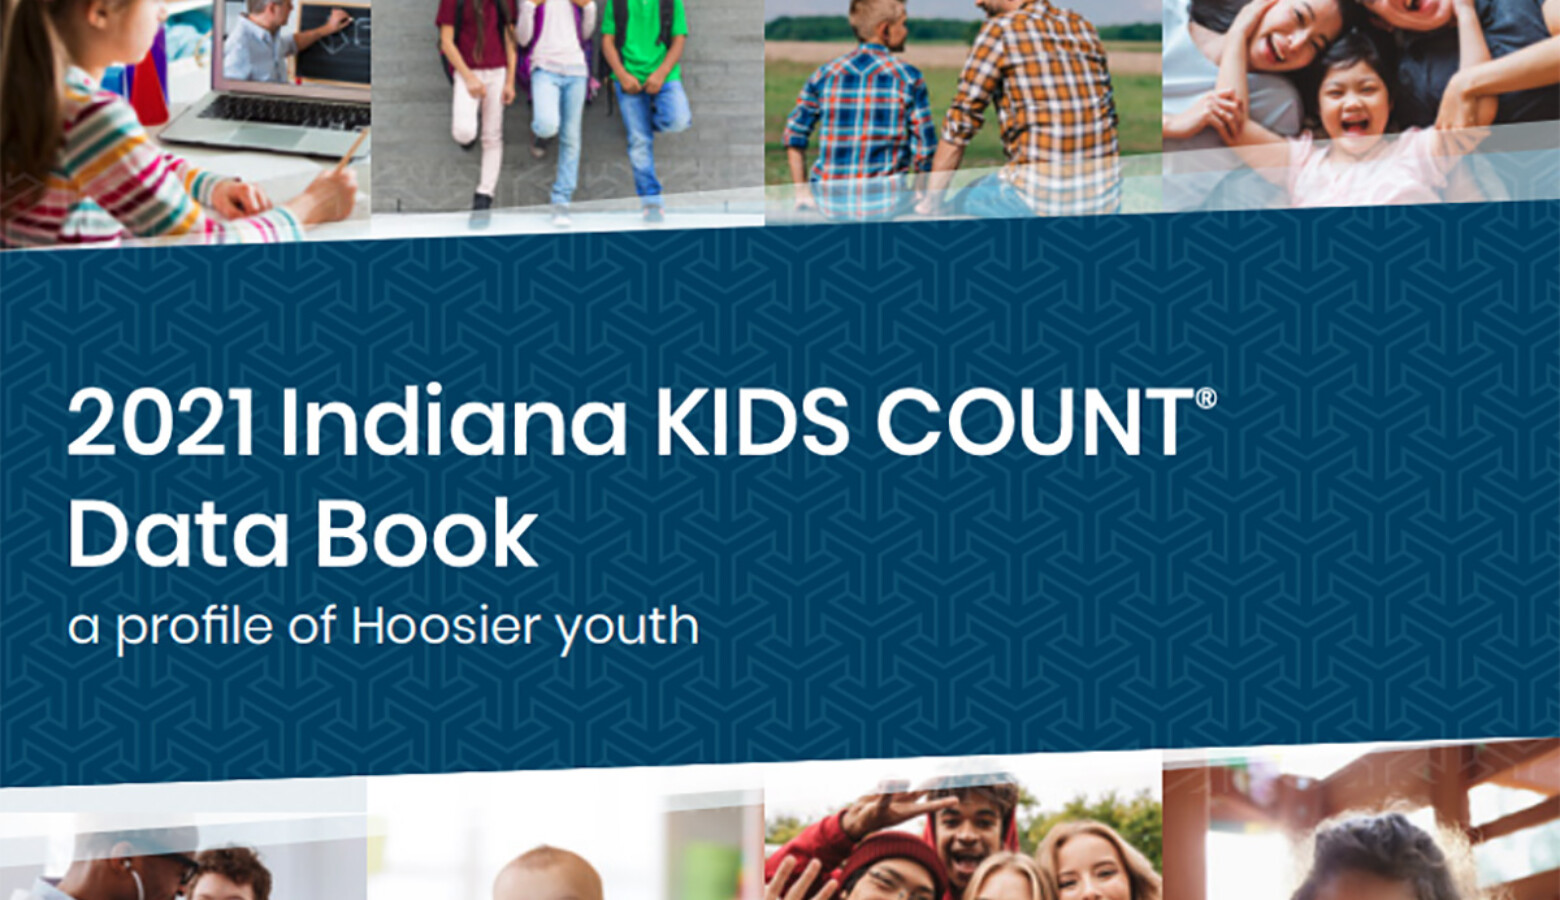 Each year, the Indiana Youth Institute works with state and national organizations to create a comprehensive look at issues affecting children. (2021 Indiana Kids Count Book)